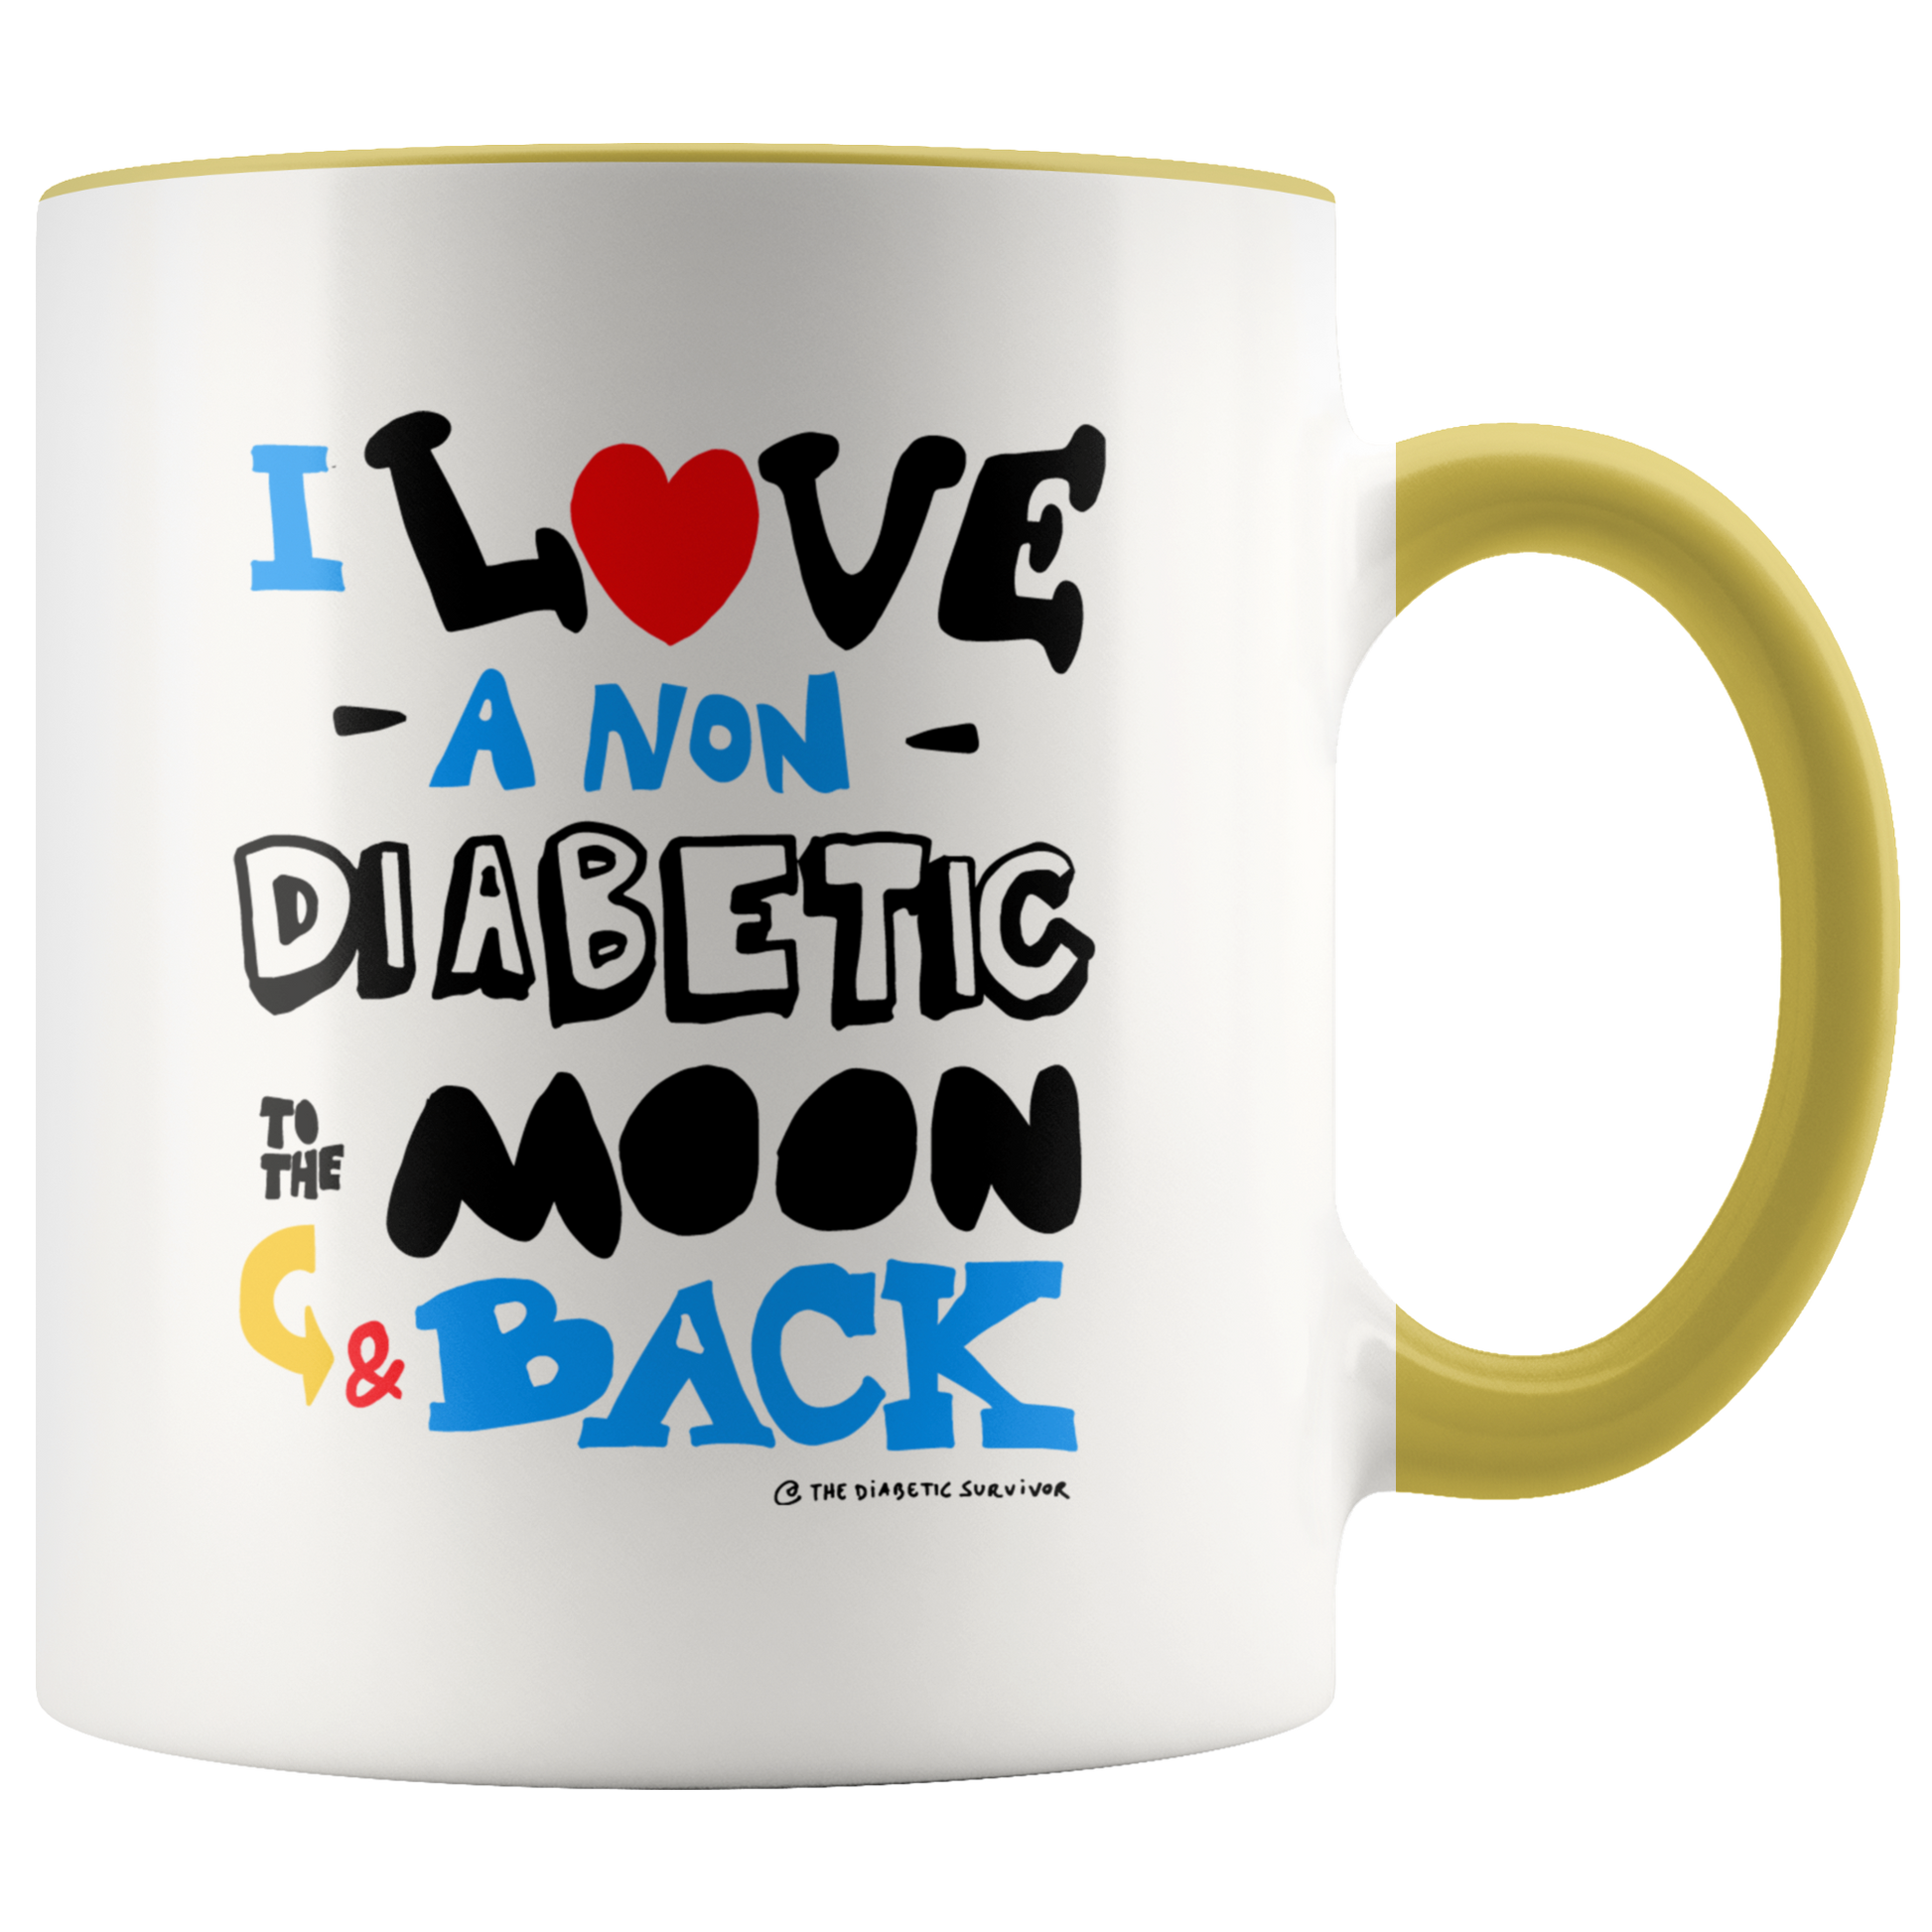 I love a NON Diabetic to the moon & back